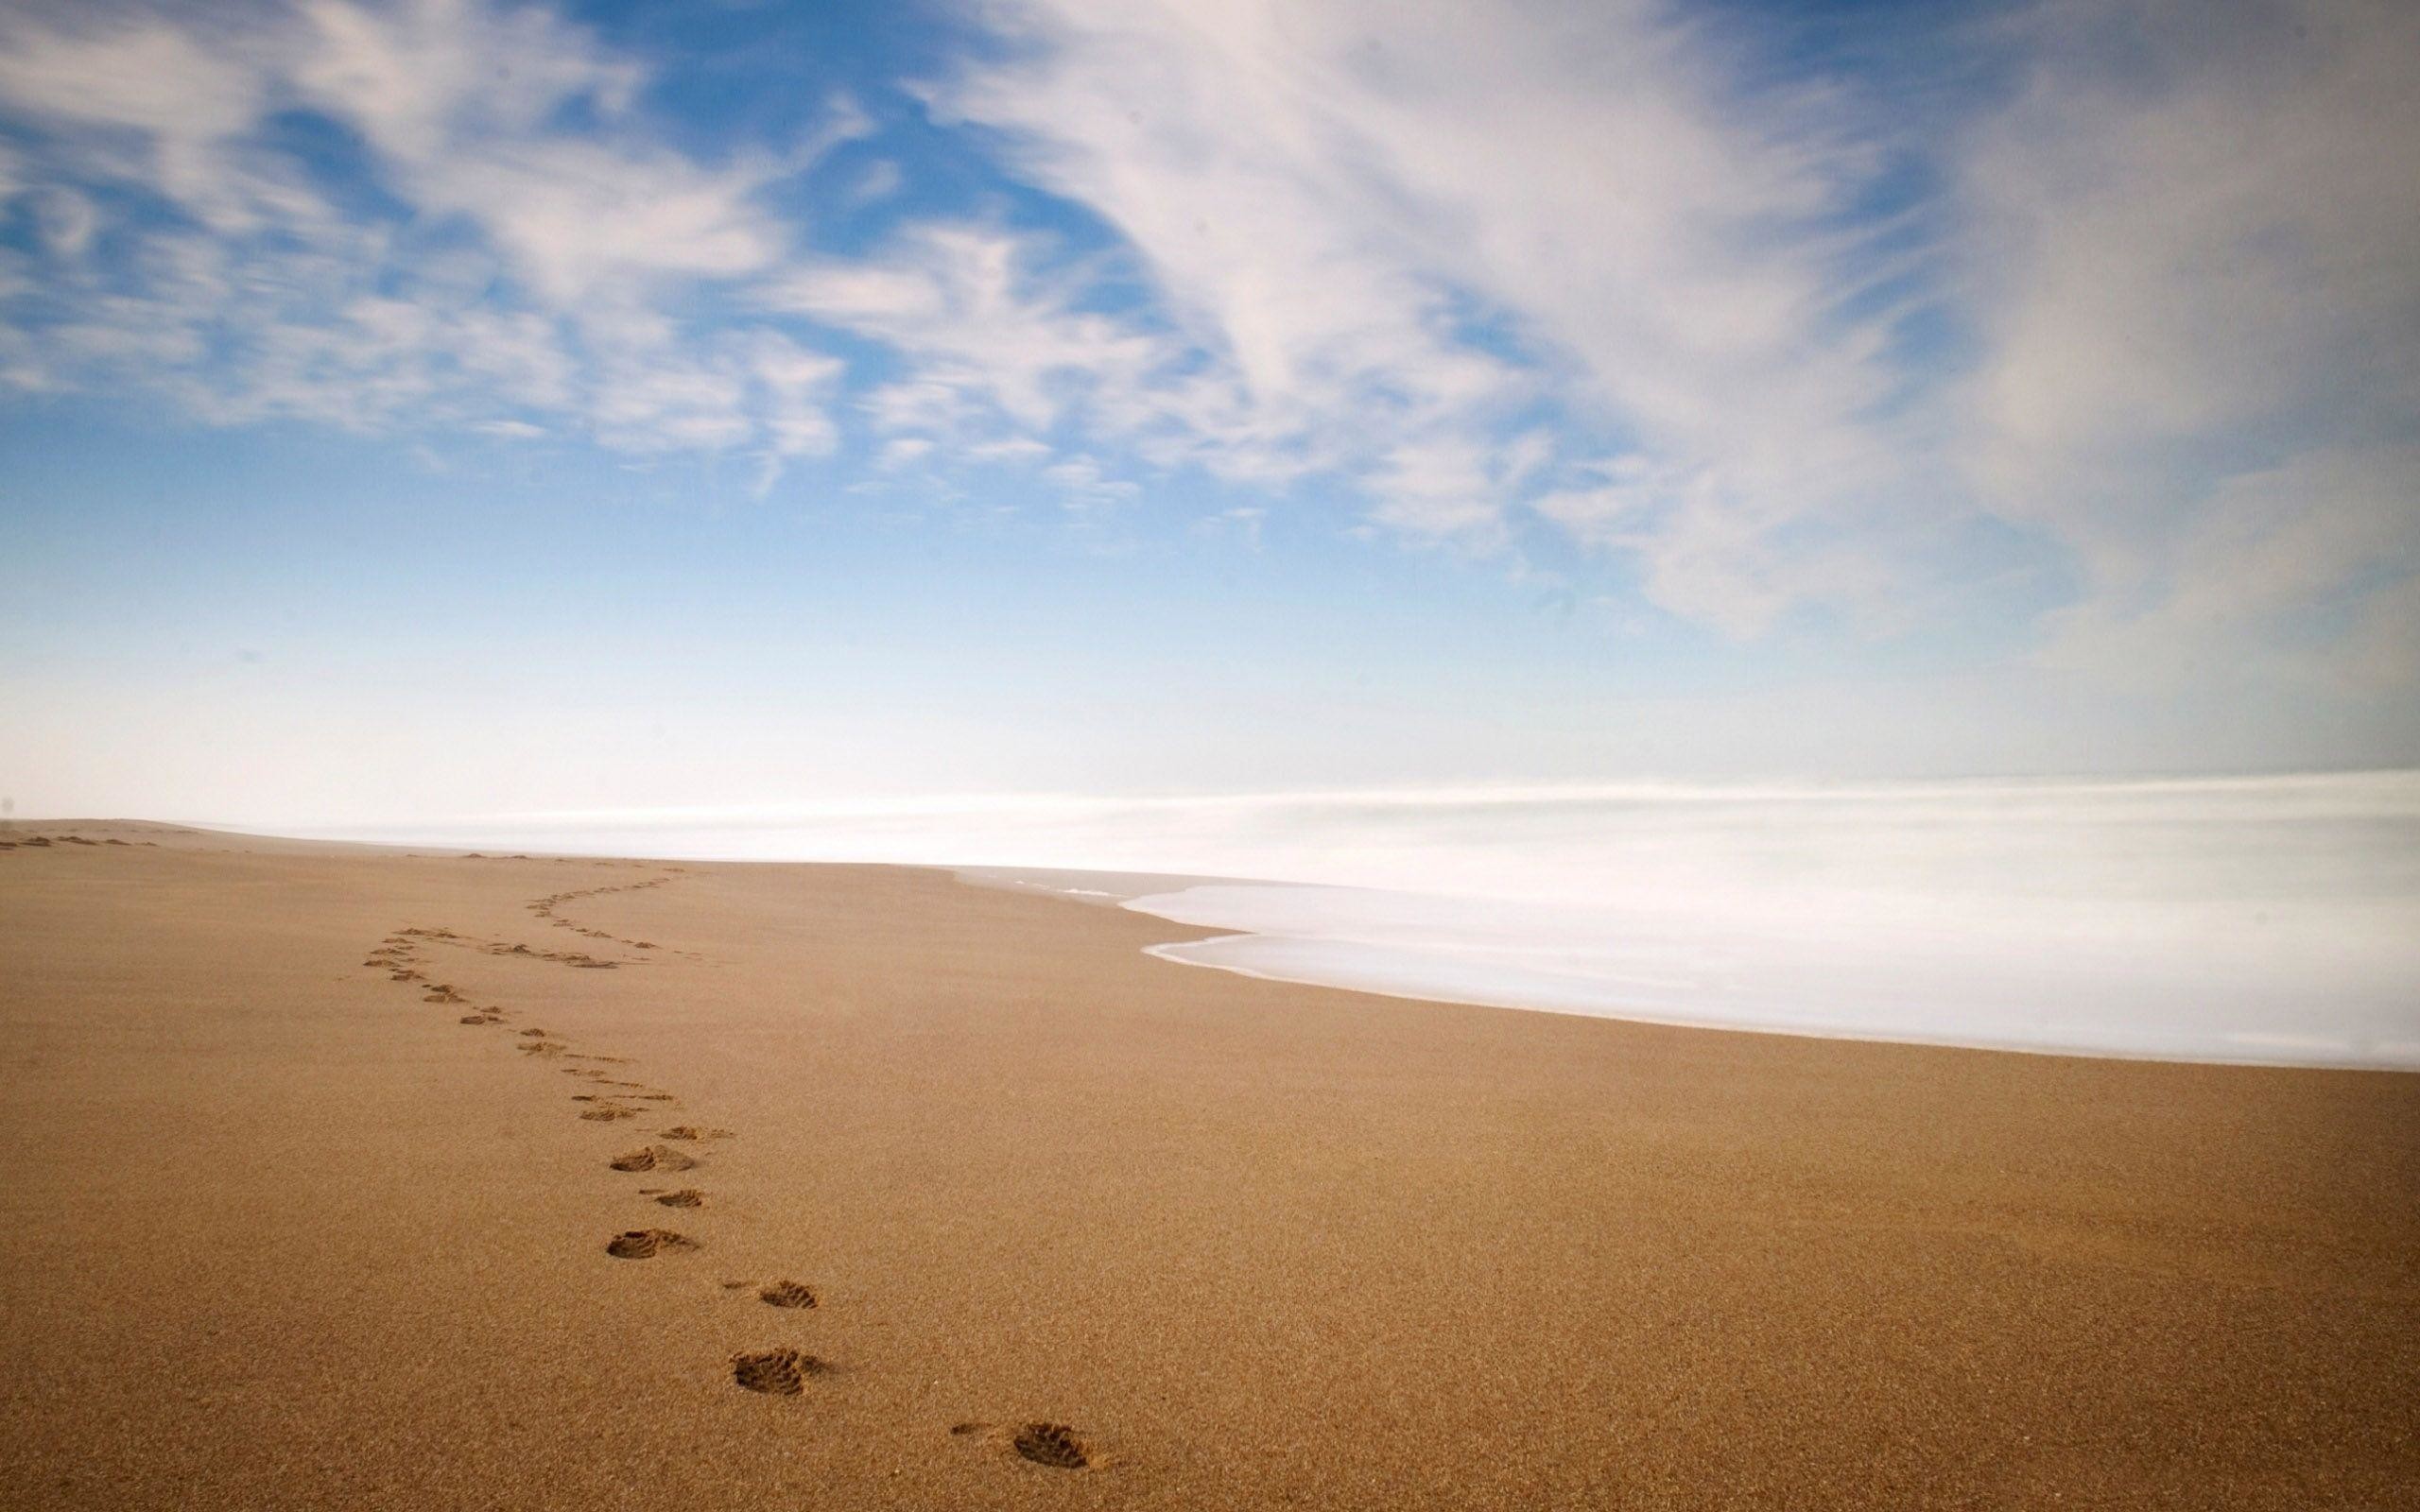 Footprints in the Sand Wallpaper ·① WallpaperTag